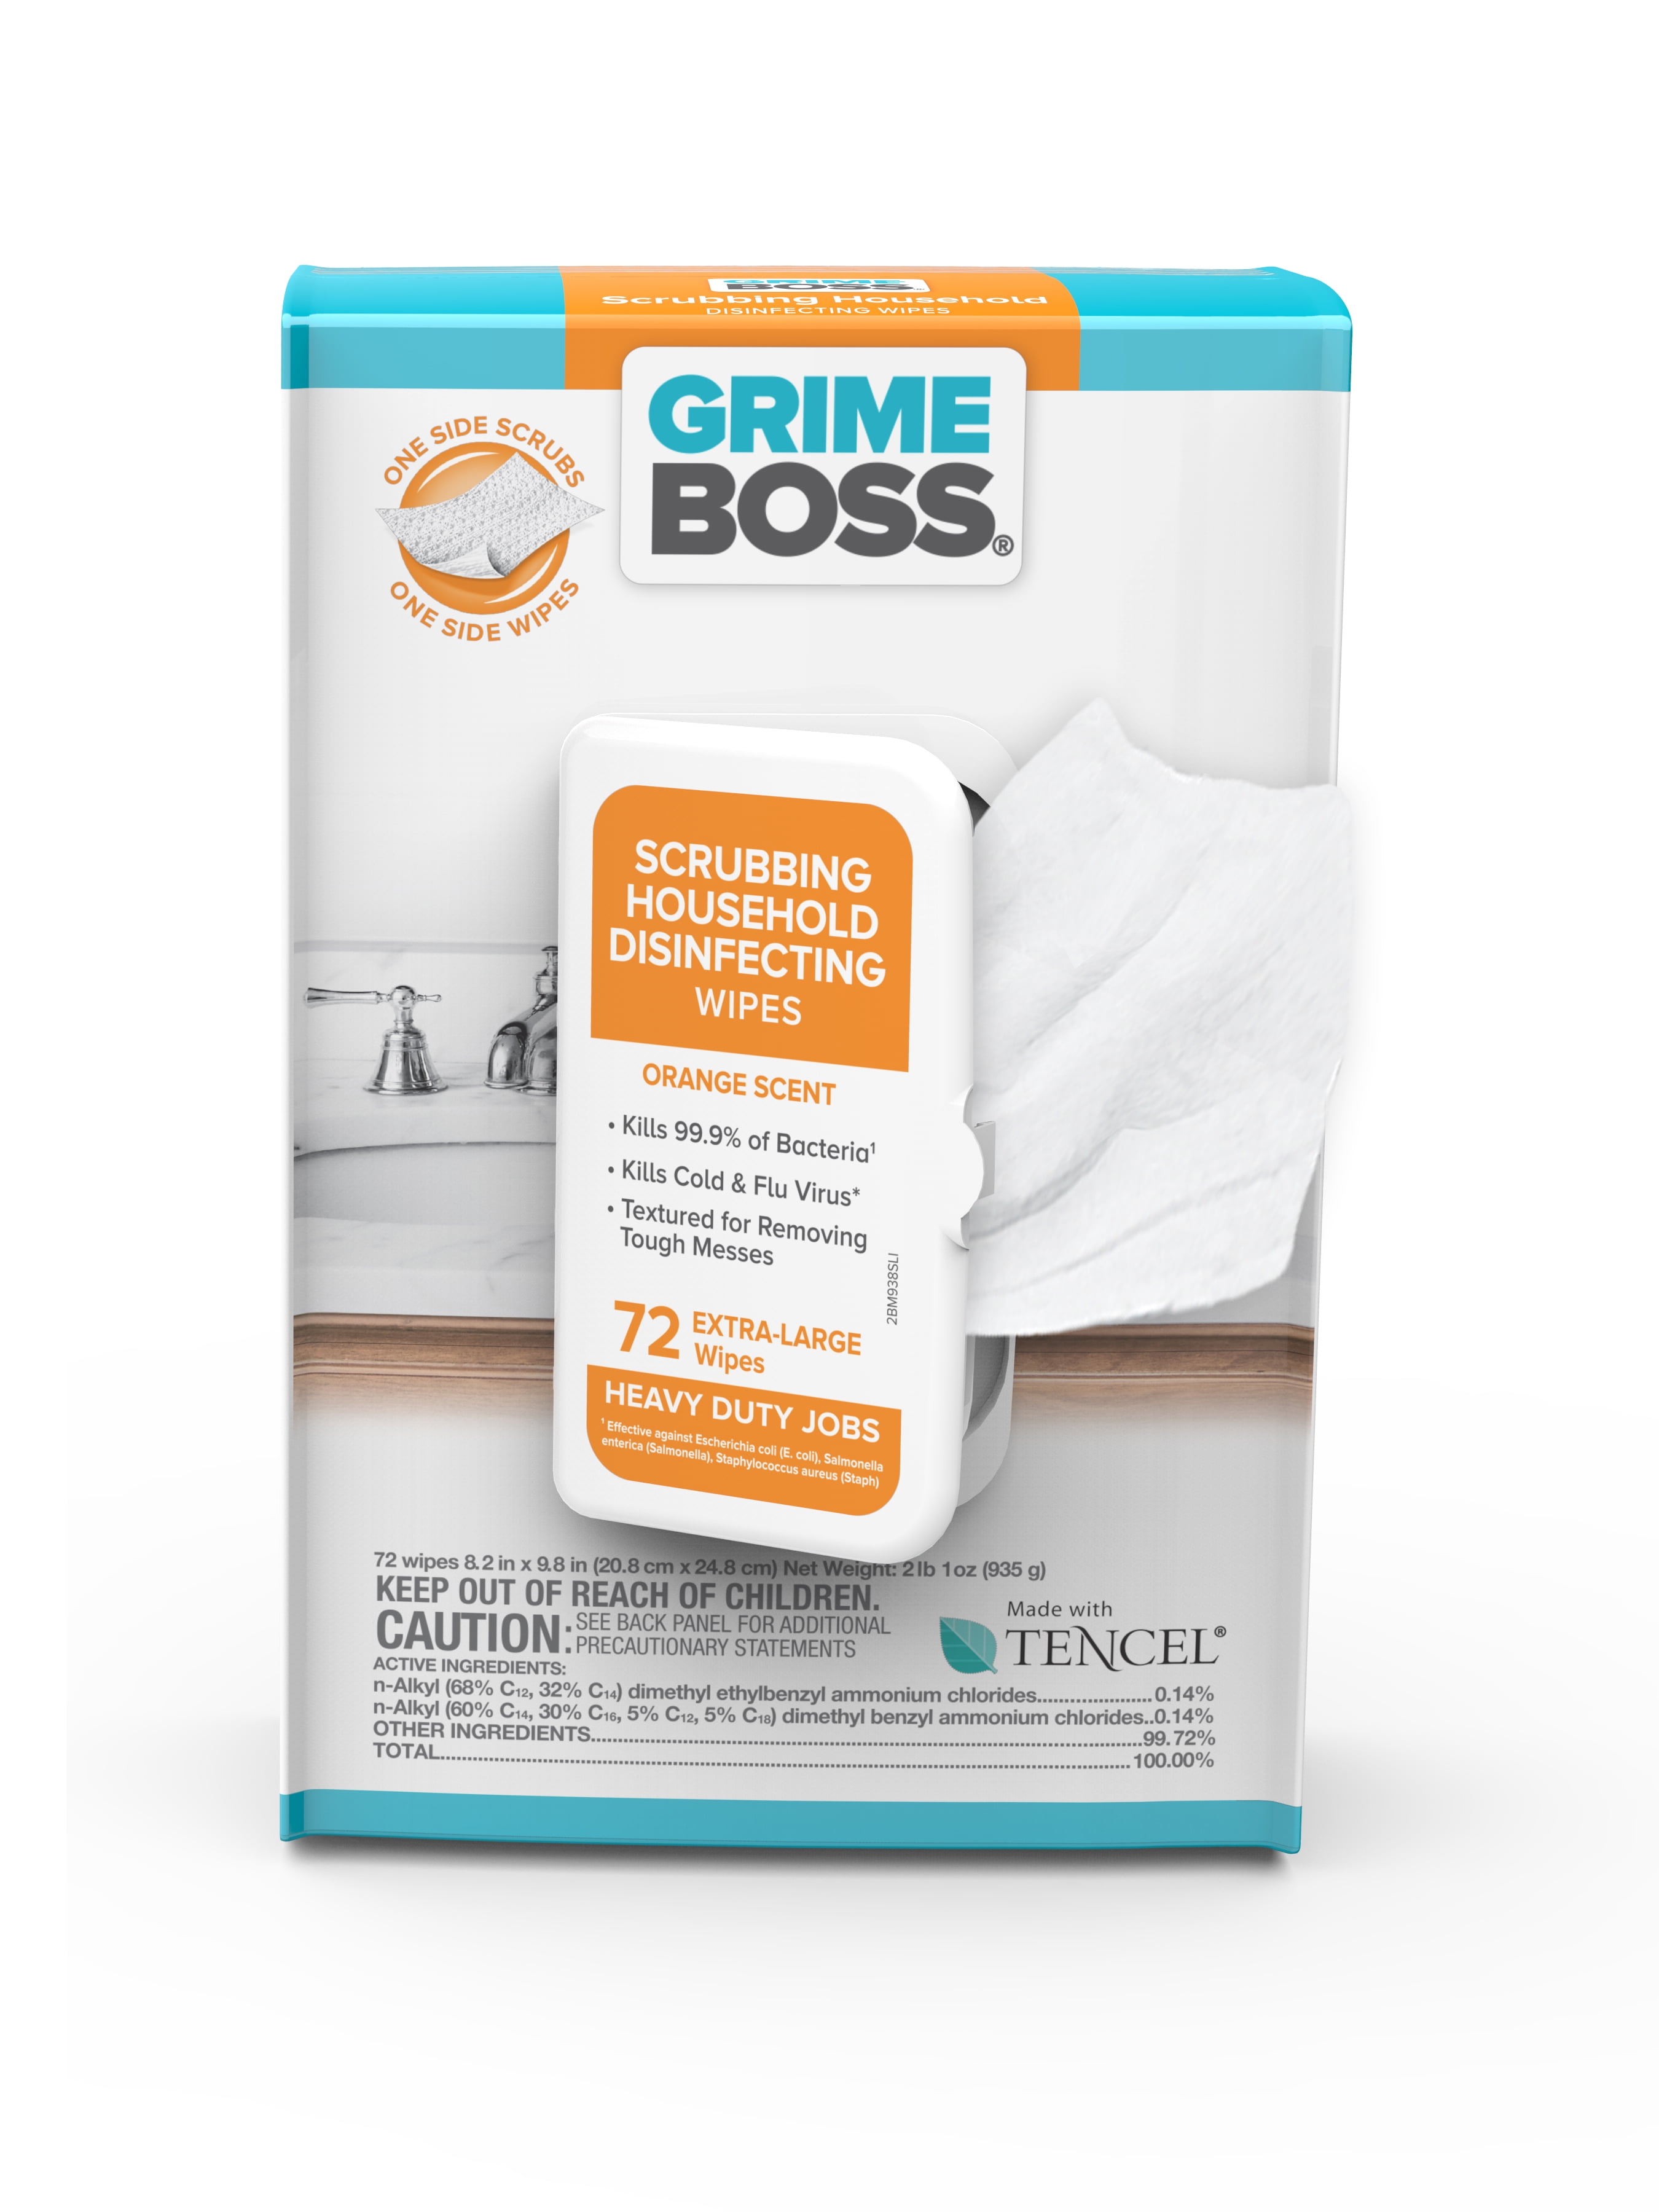 GRIME BOSS Orange Scent Scrubbing Household Disinfecting Wipes, 72 count